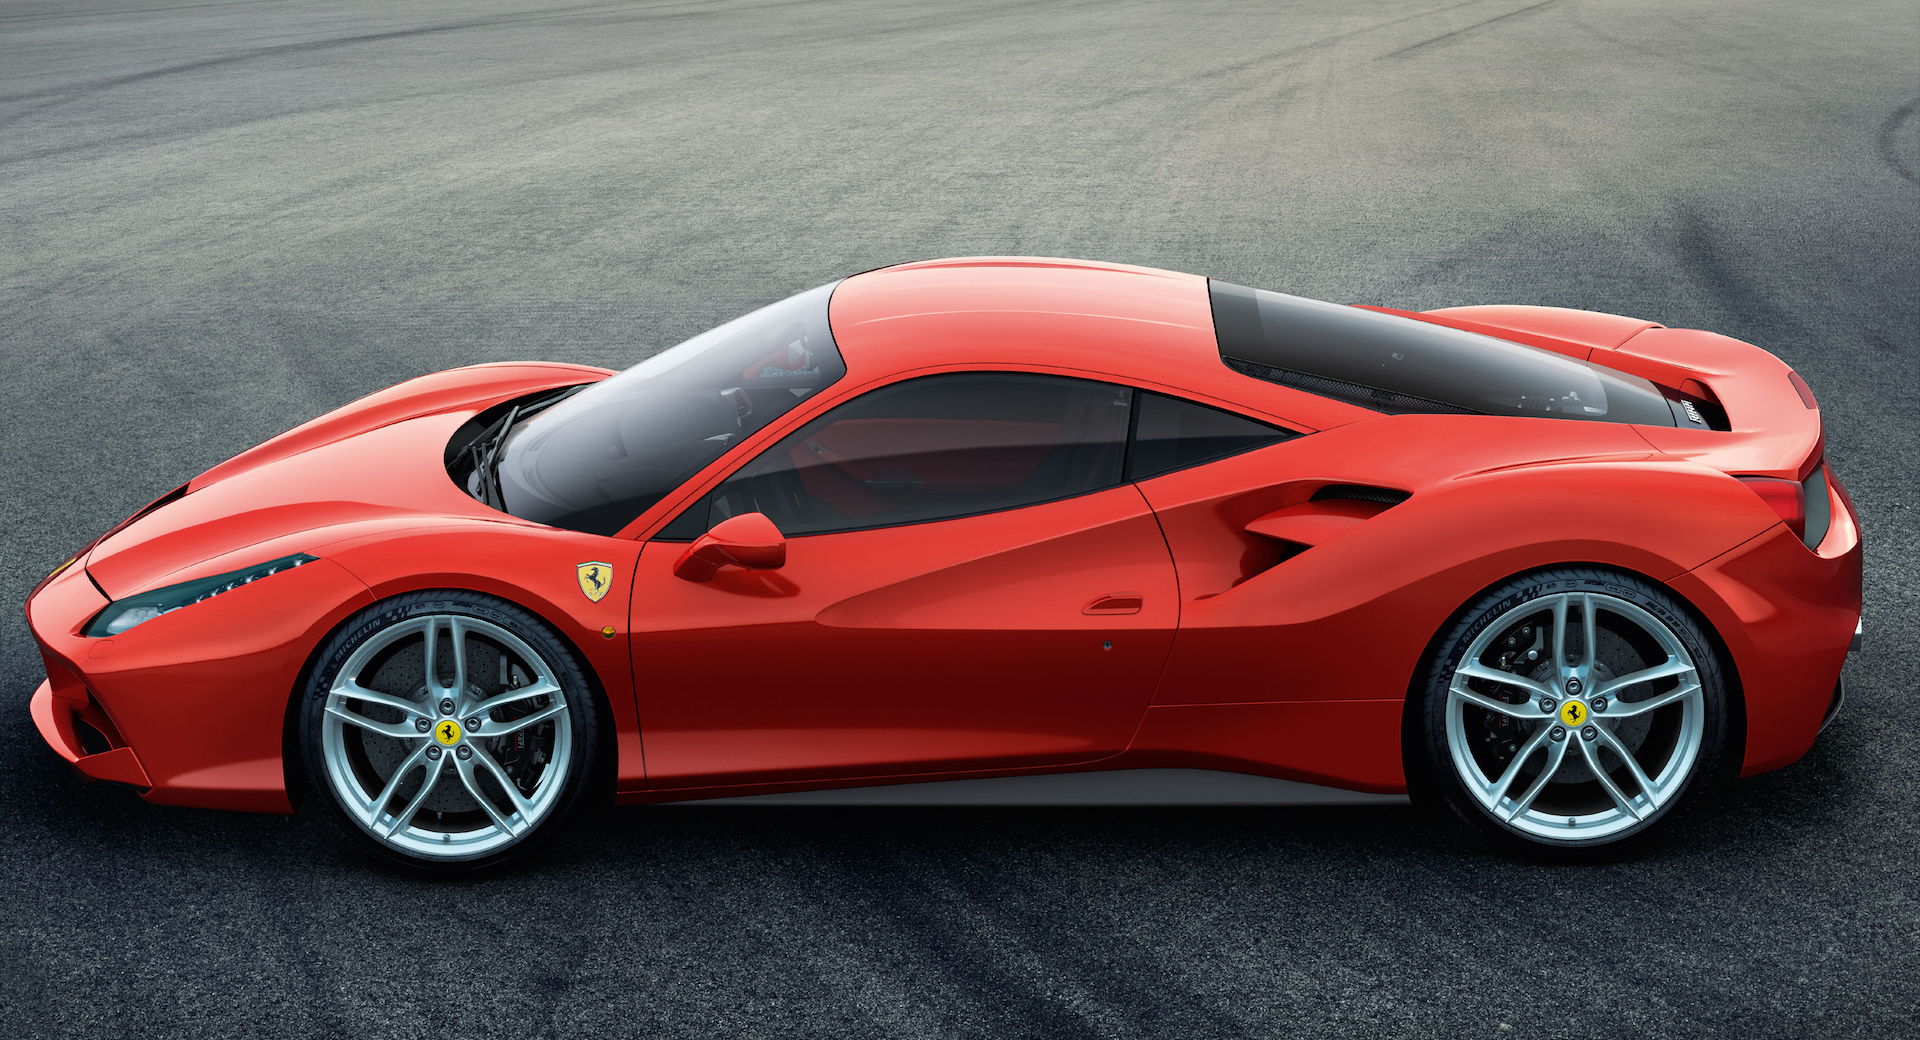 Used Ferrari 488s now cost less than 458s, as customers appreciate the Latter’s naturally aspirated V8